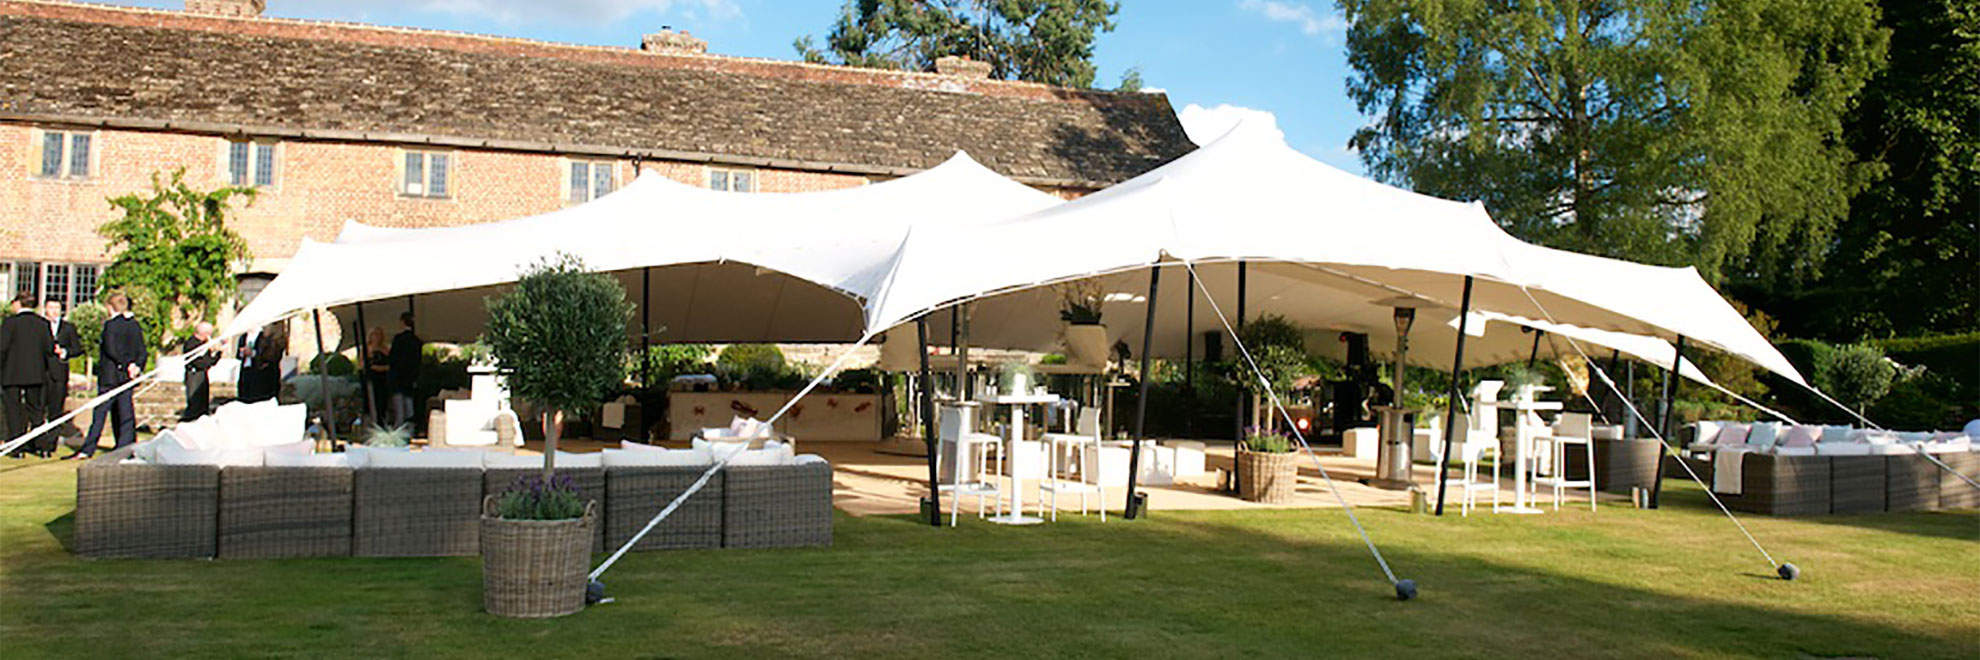 White stretch tent with separate lounging area and bar area